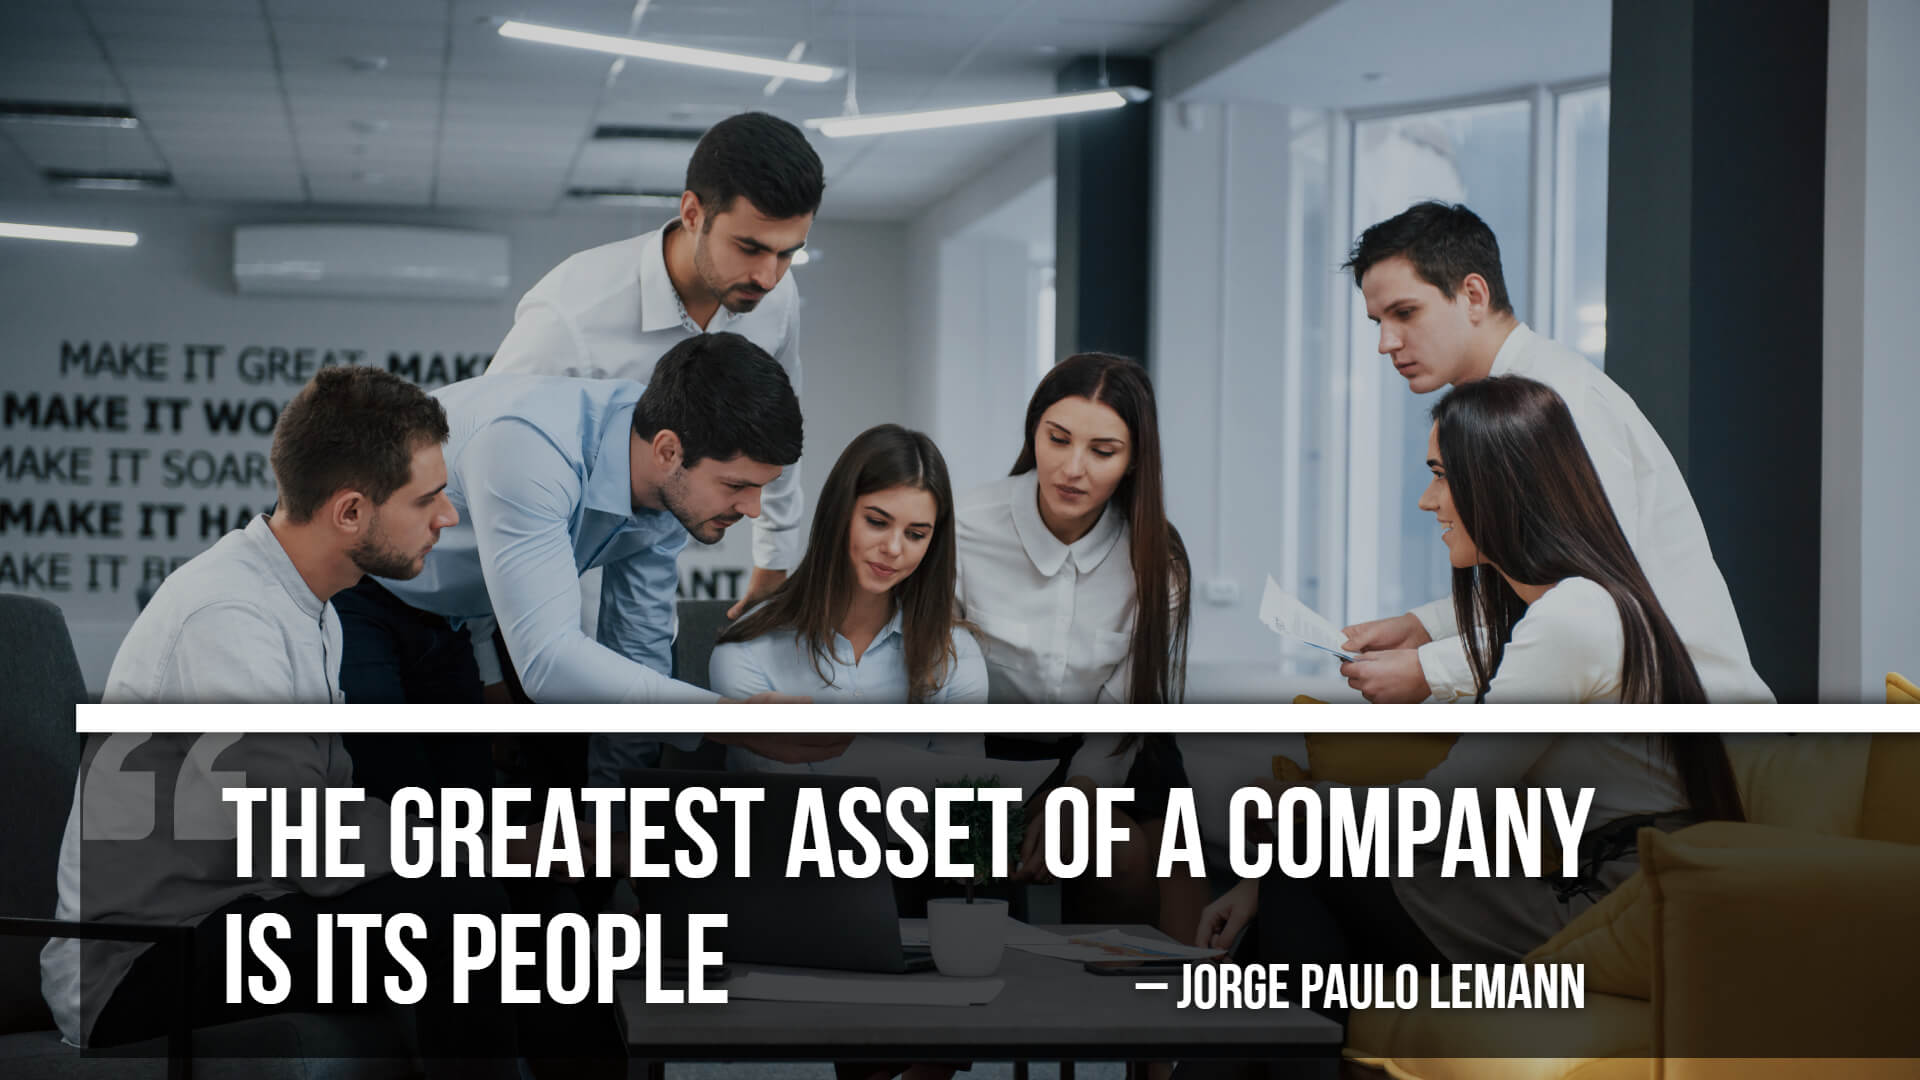 jorge paulo lemann quote on corporate culture